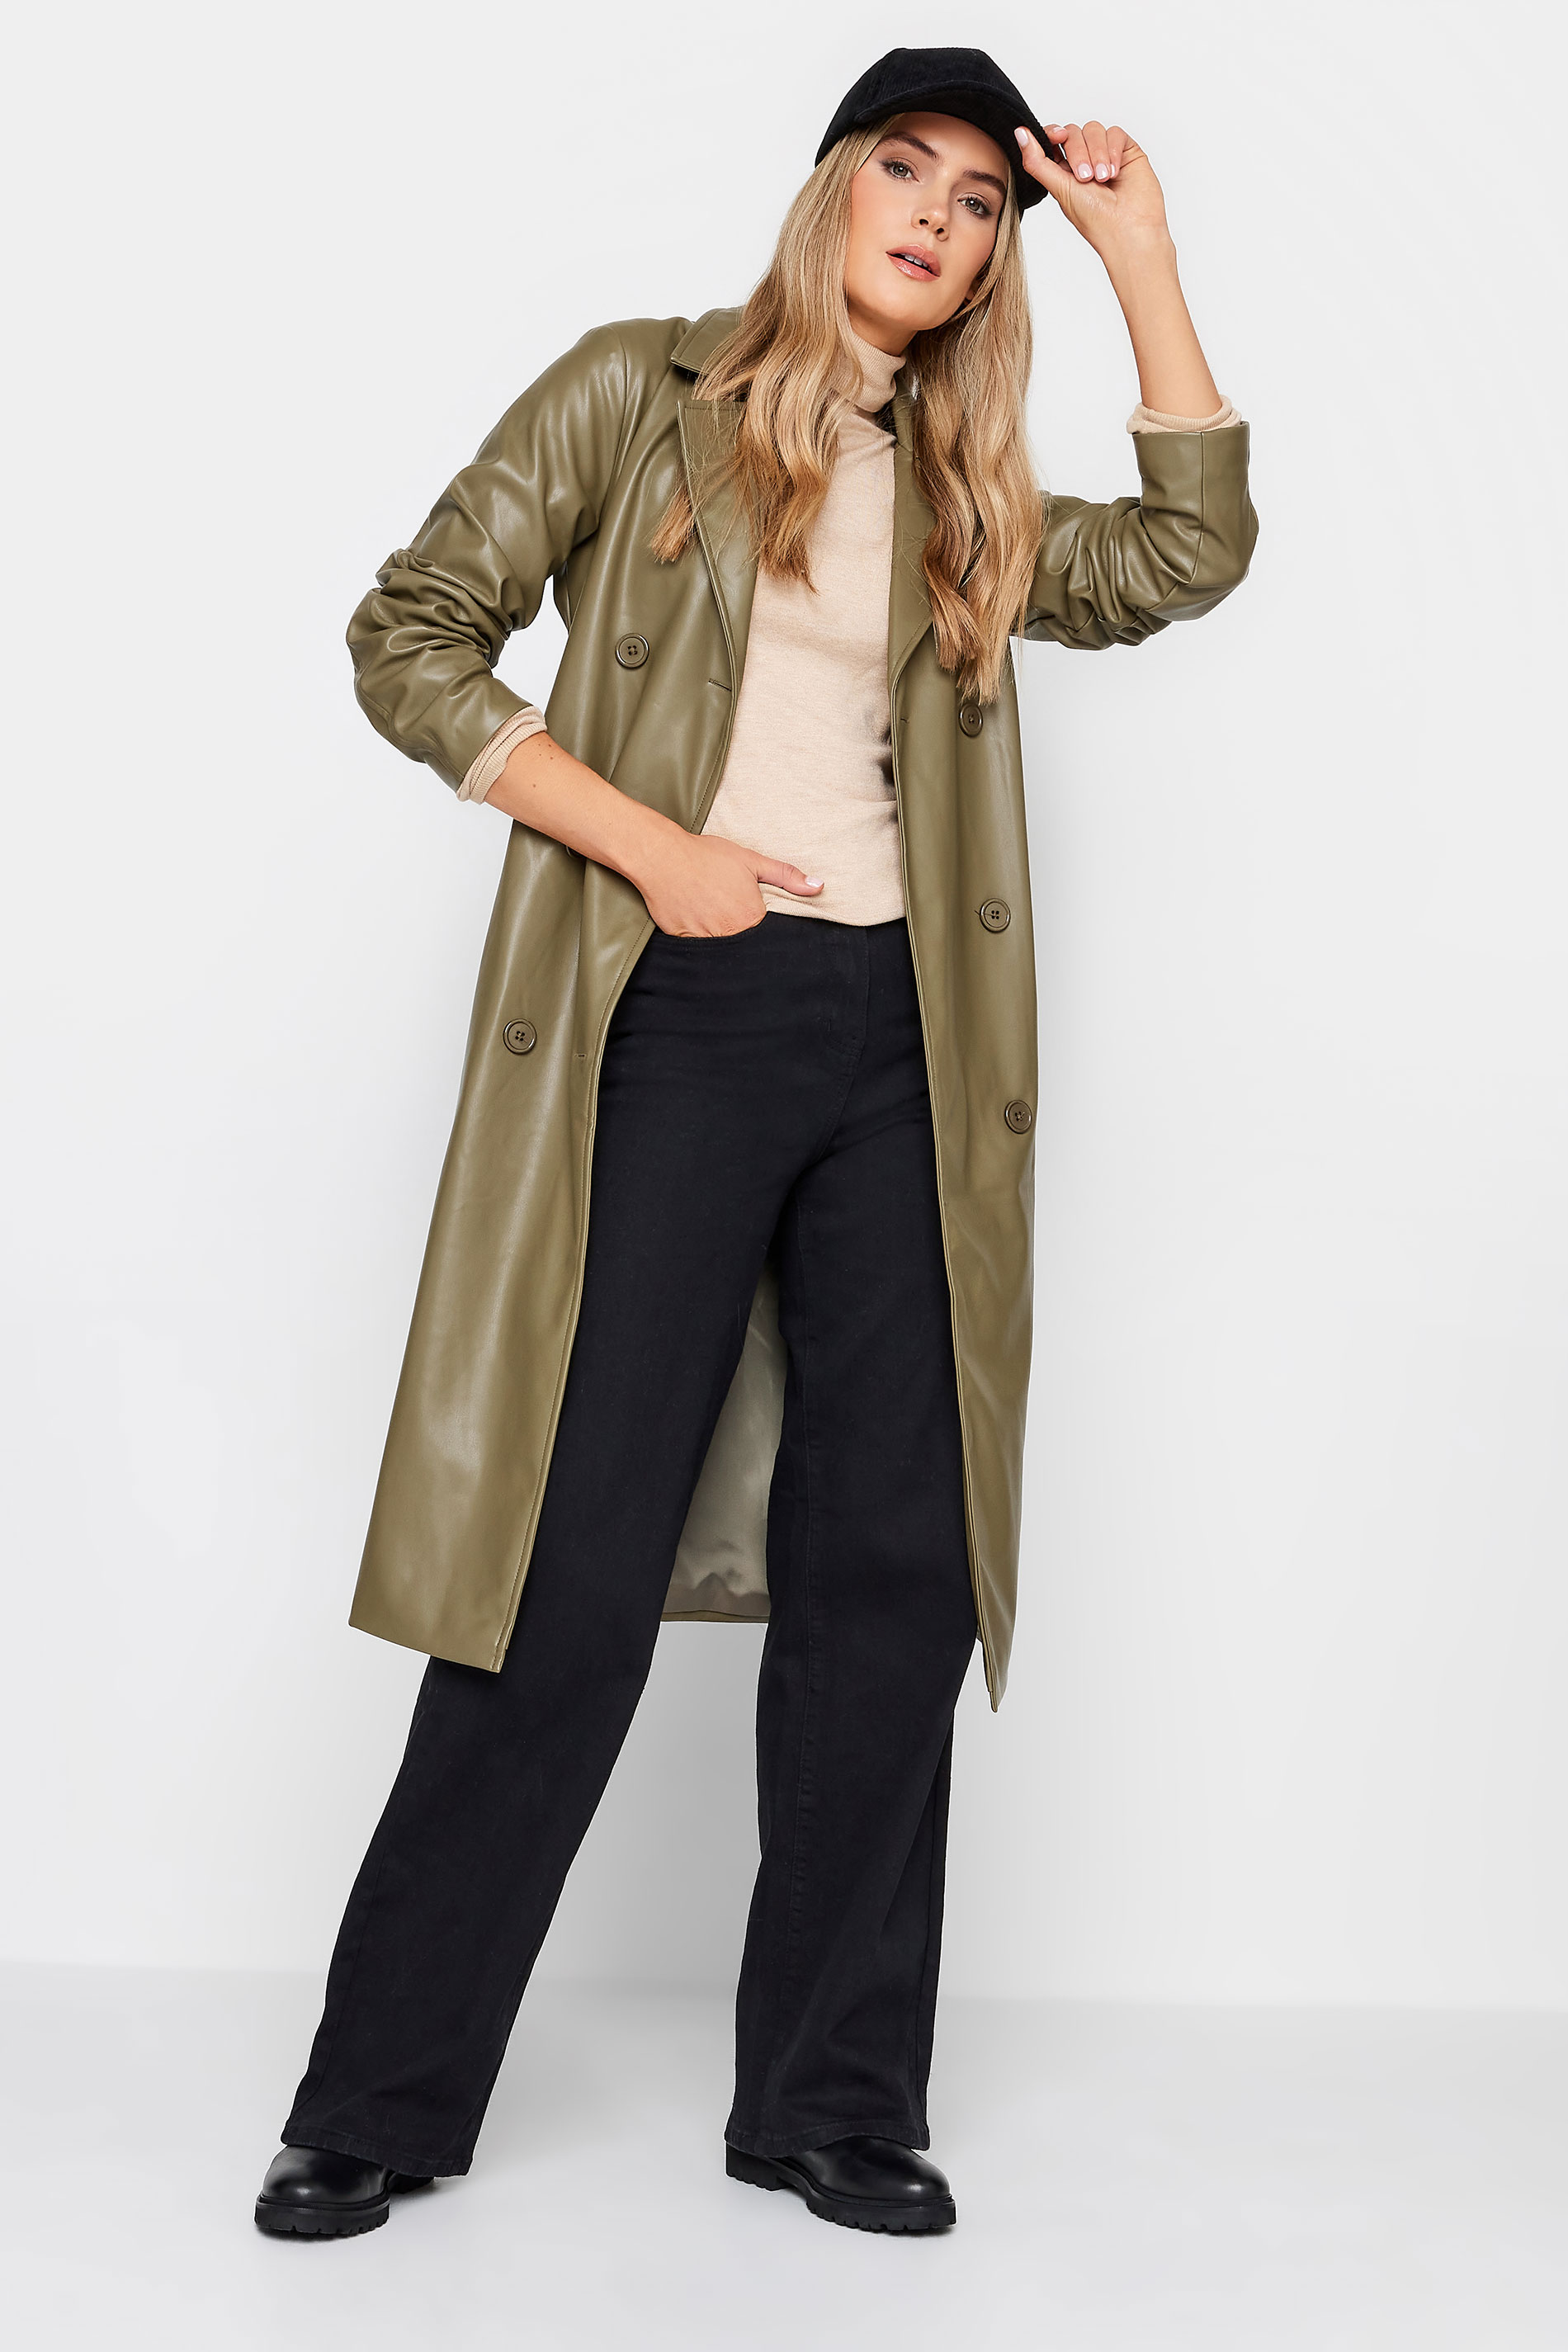 LTS Tall Olive Green Faux Leather Trench Coat | Long Tall Sally 2